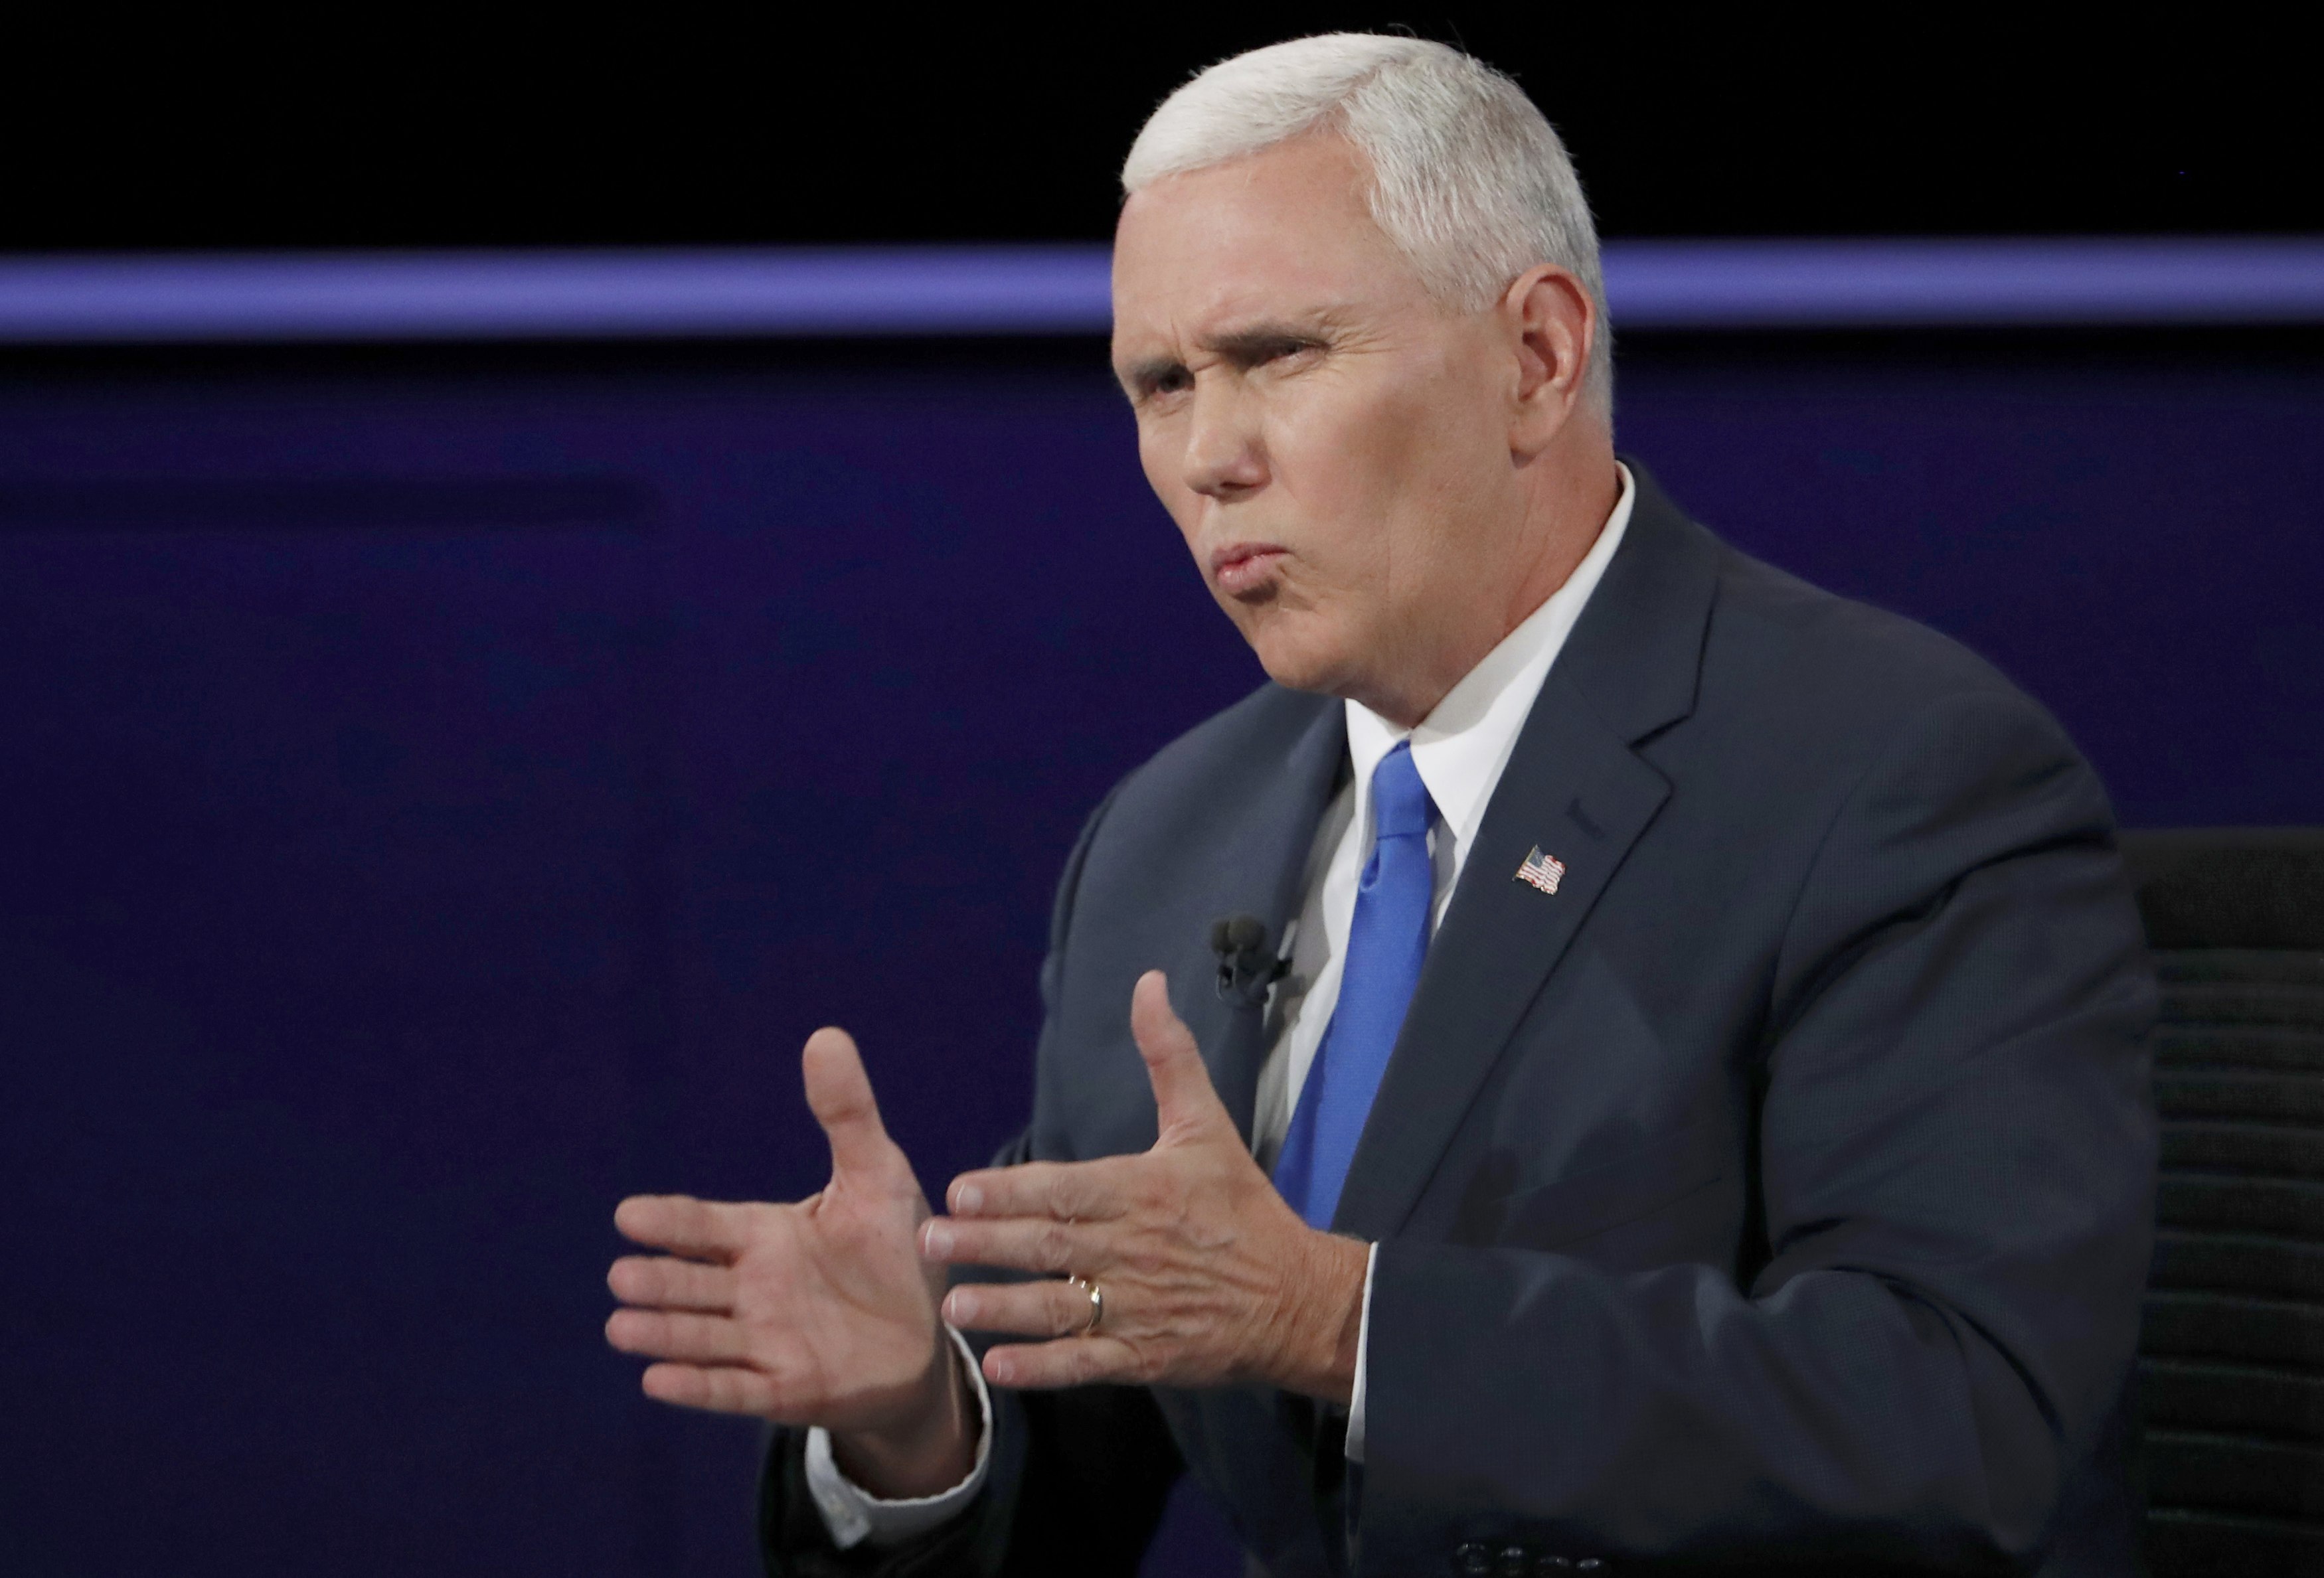 Indiana Gov. Mike Pence, the Republican nominee for U.S. vice president, speaks Oct. 4 during his vice presidential debate against U.S. Sen. Tim Kaine of Virginia, the Democratic nominee, at Longwood University in Farmville, Va. (CNS photo/Kevin Lamarque, Reuters)